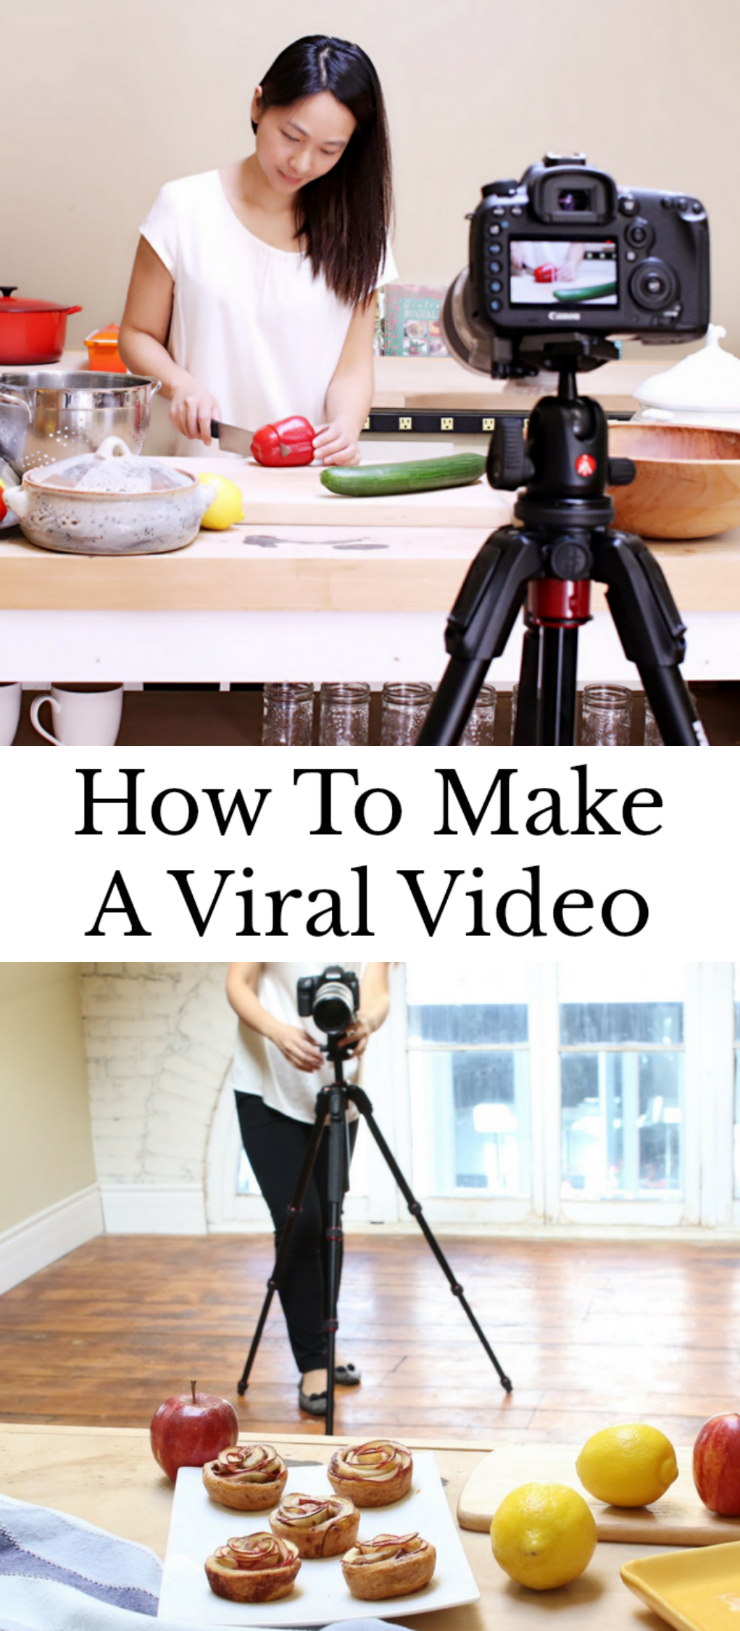 Tips for making a viral video from the video creator behind TipBuzz.